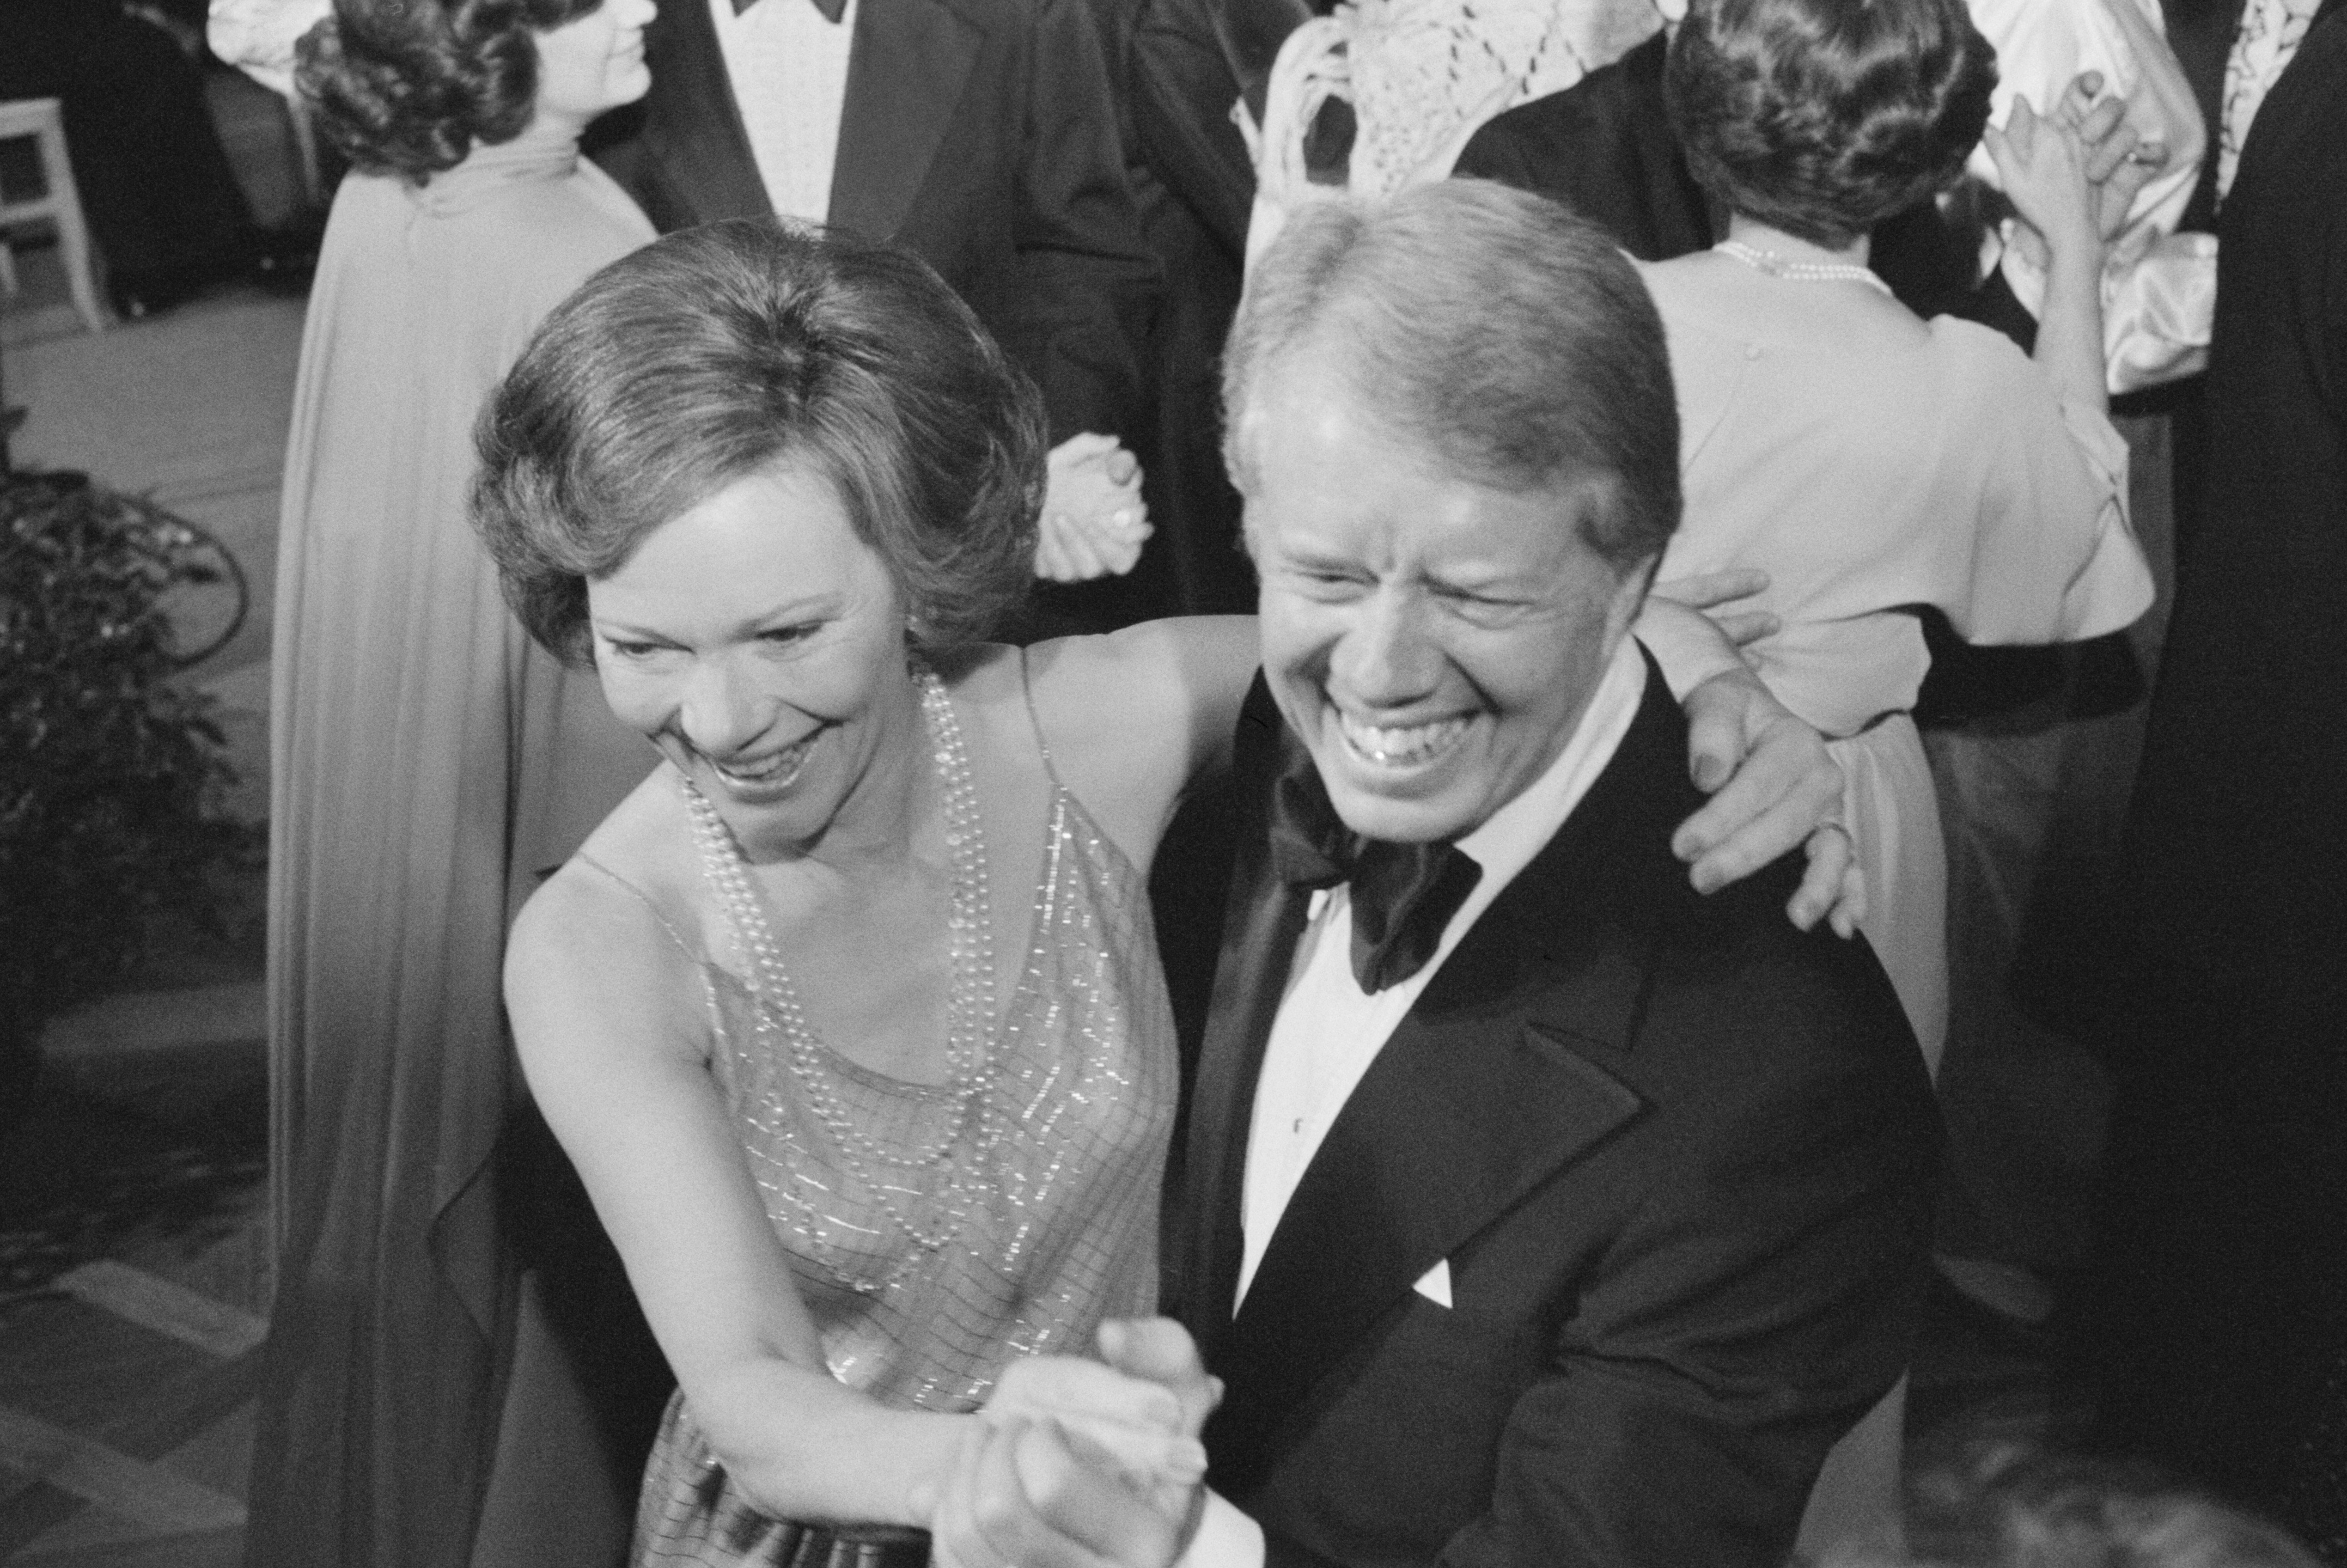 U.S. President Jimmy Carter and First Lady Rosalynn Carter dance at a White House Congressional Ball, Washington, D.C., USA, photograph by Marion S. Trikosko, December 13, 1978 | Source: Getty Images